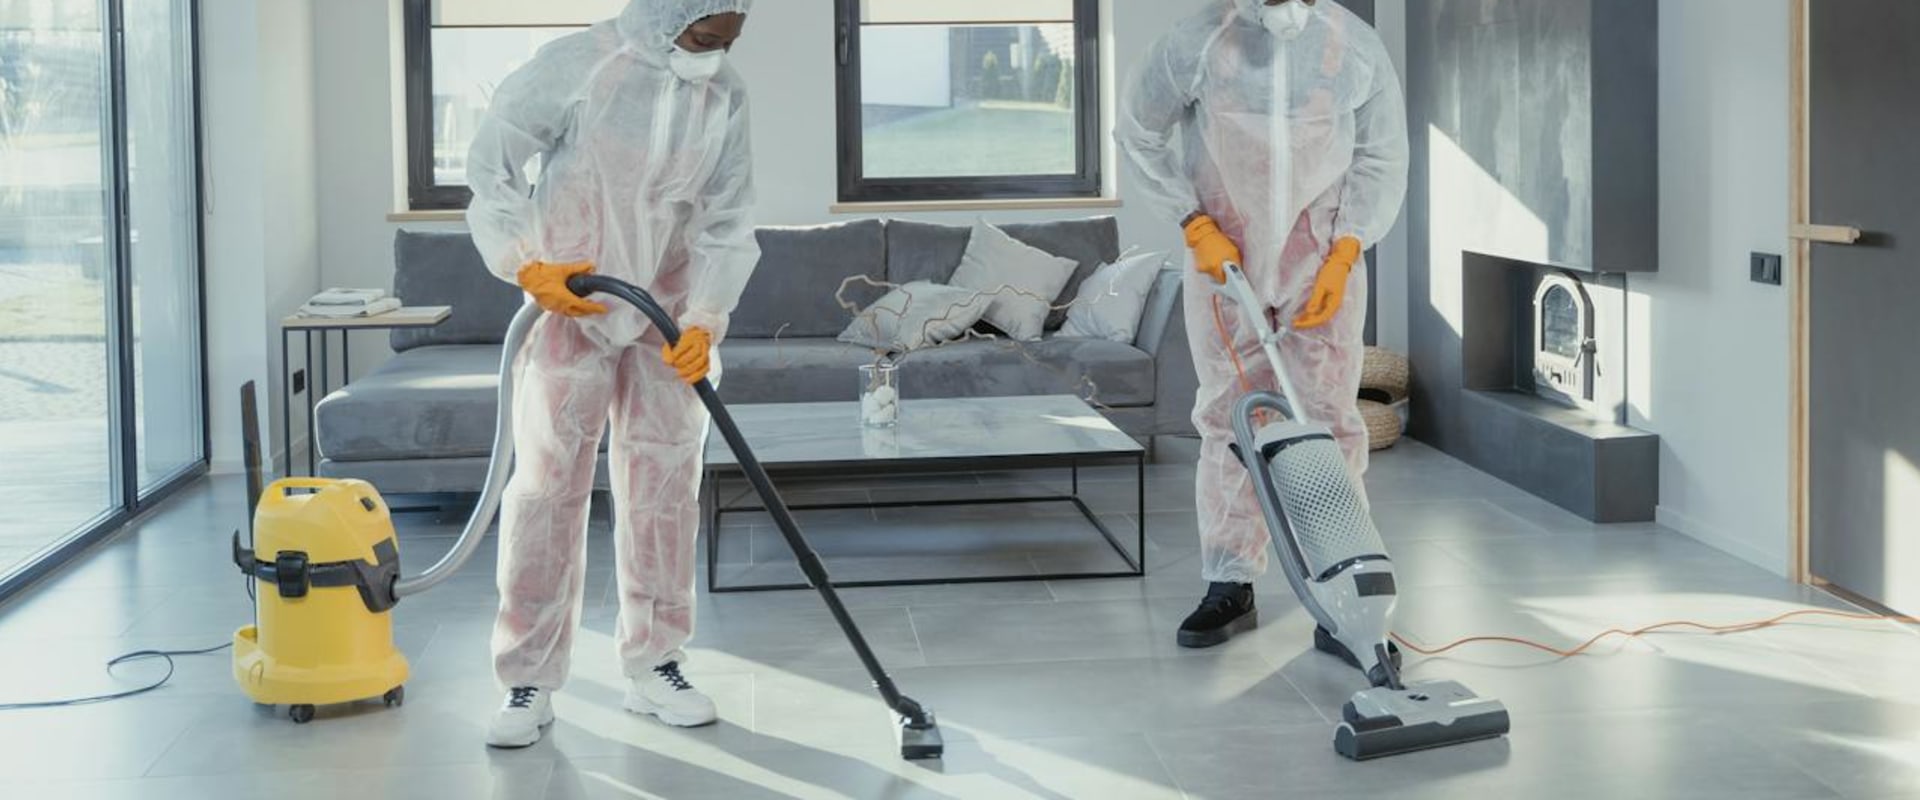 Post-Construction Cleaning Service In Castle Rock, CO: Making Your Remodeled Home Shine